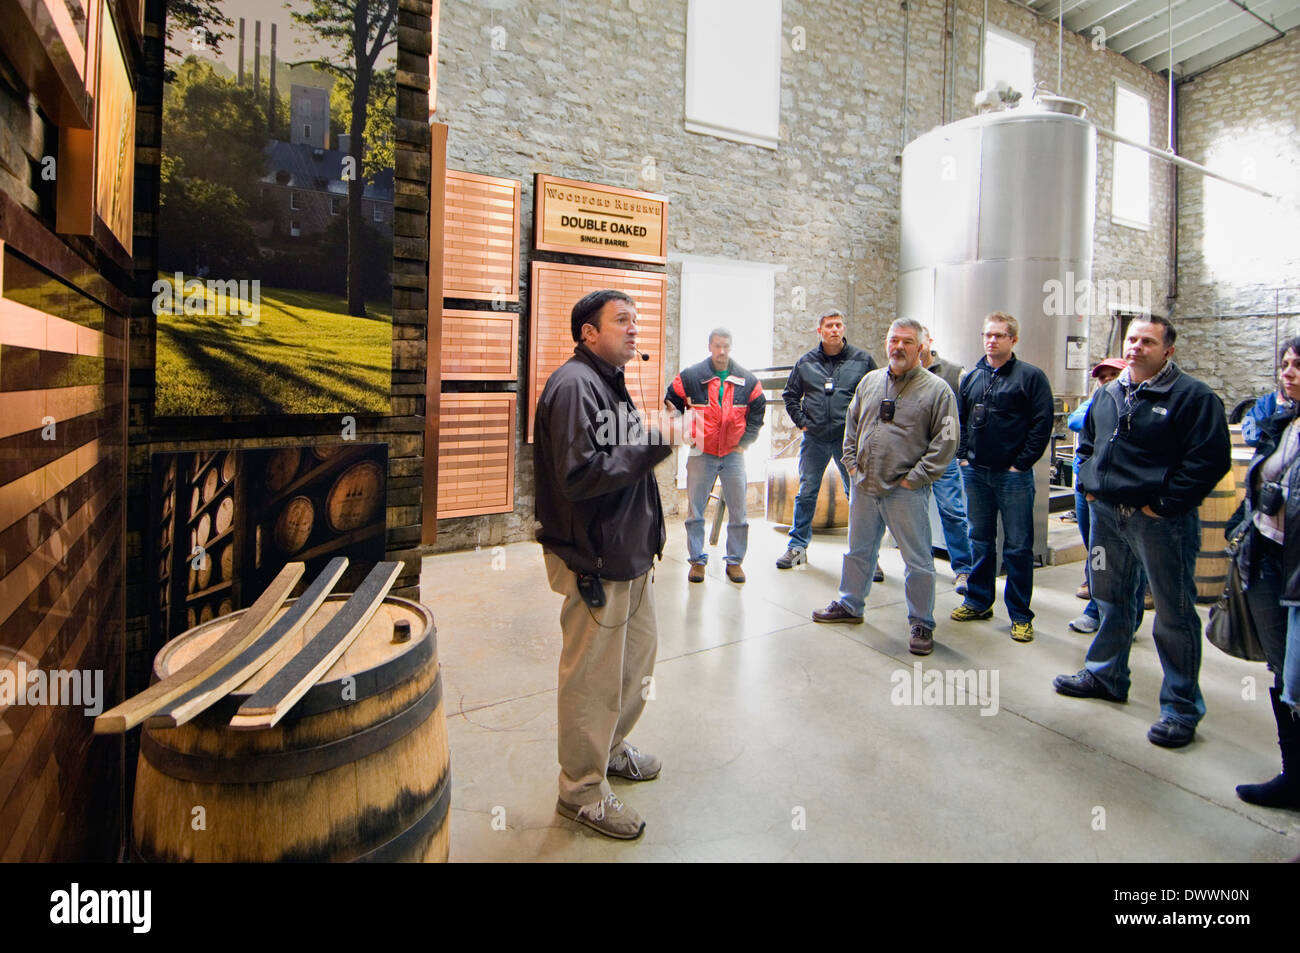 Tour Guide Explaining the Charred White Oak Barrels used to Age Bourbon at Woodford Reserve Distillery in Kentucky Stock Photo